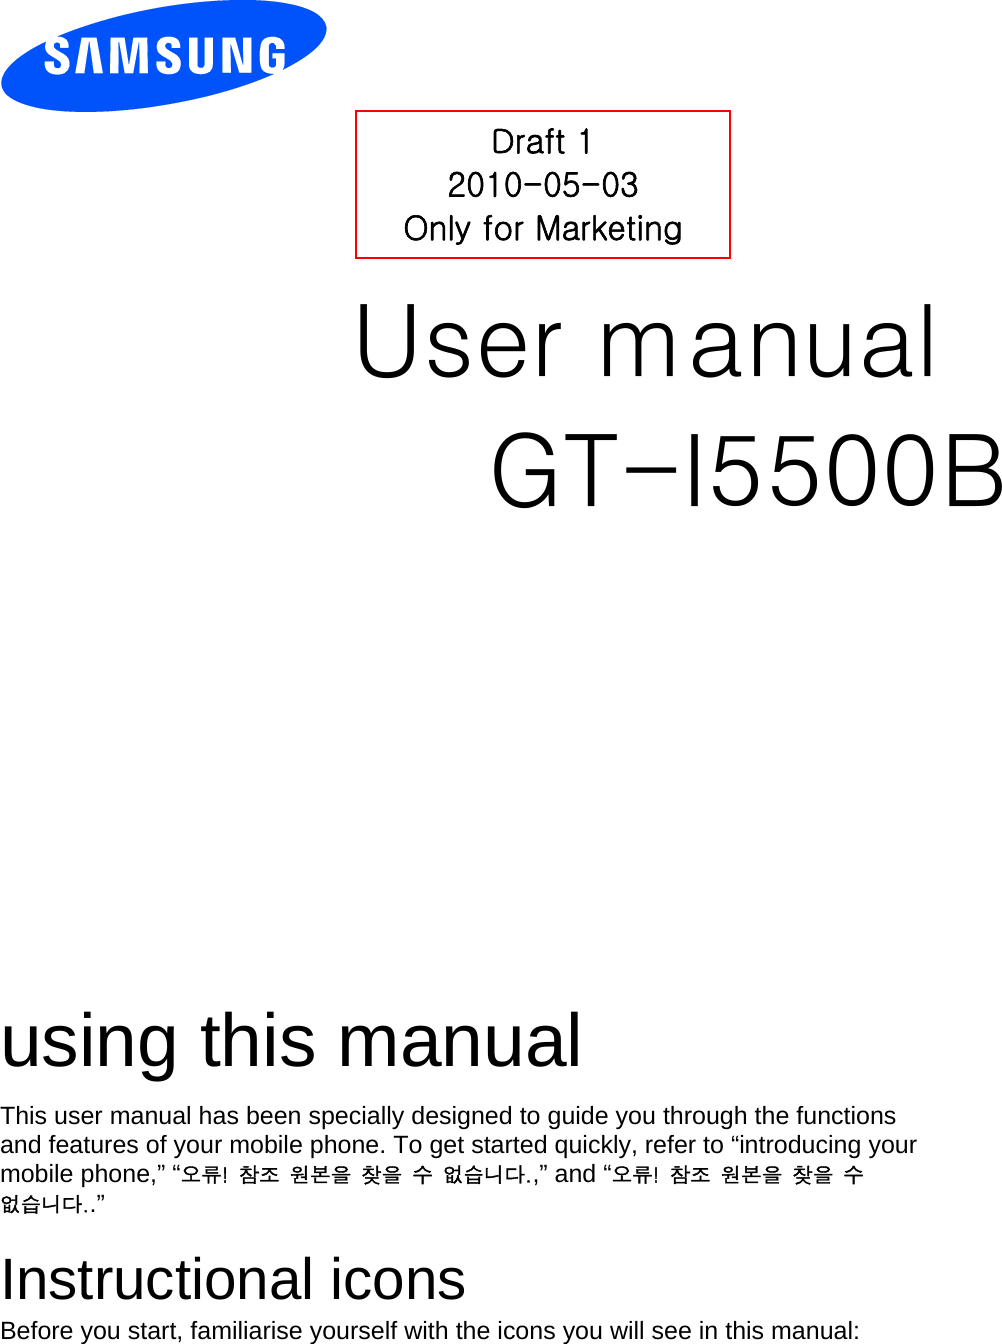          User manual GT-I5500B                  using this manual This user manual has been specially designed to guide you through the functions and features of your mobile phone. To get started quickly, refer to “introducing your mobile phone,” “오류!  참조  원본을  찾을  수  없습니다.,” and “오류!  참조  원본을  찾을  수 없습니다..”  Instructional icons Before you start, familiarise yourself with the icons you will see in this manual:   Draft 1 2010-05-03 Only for Marketing 